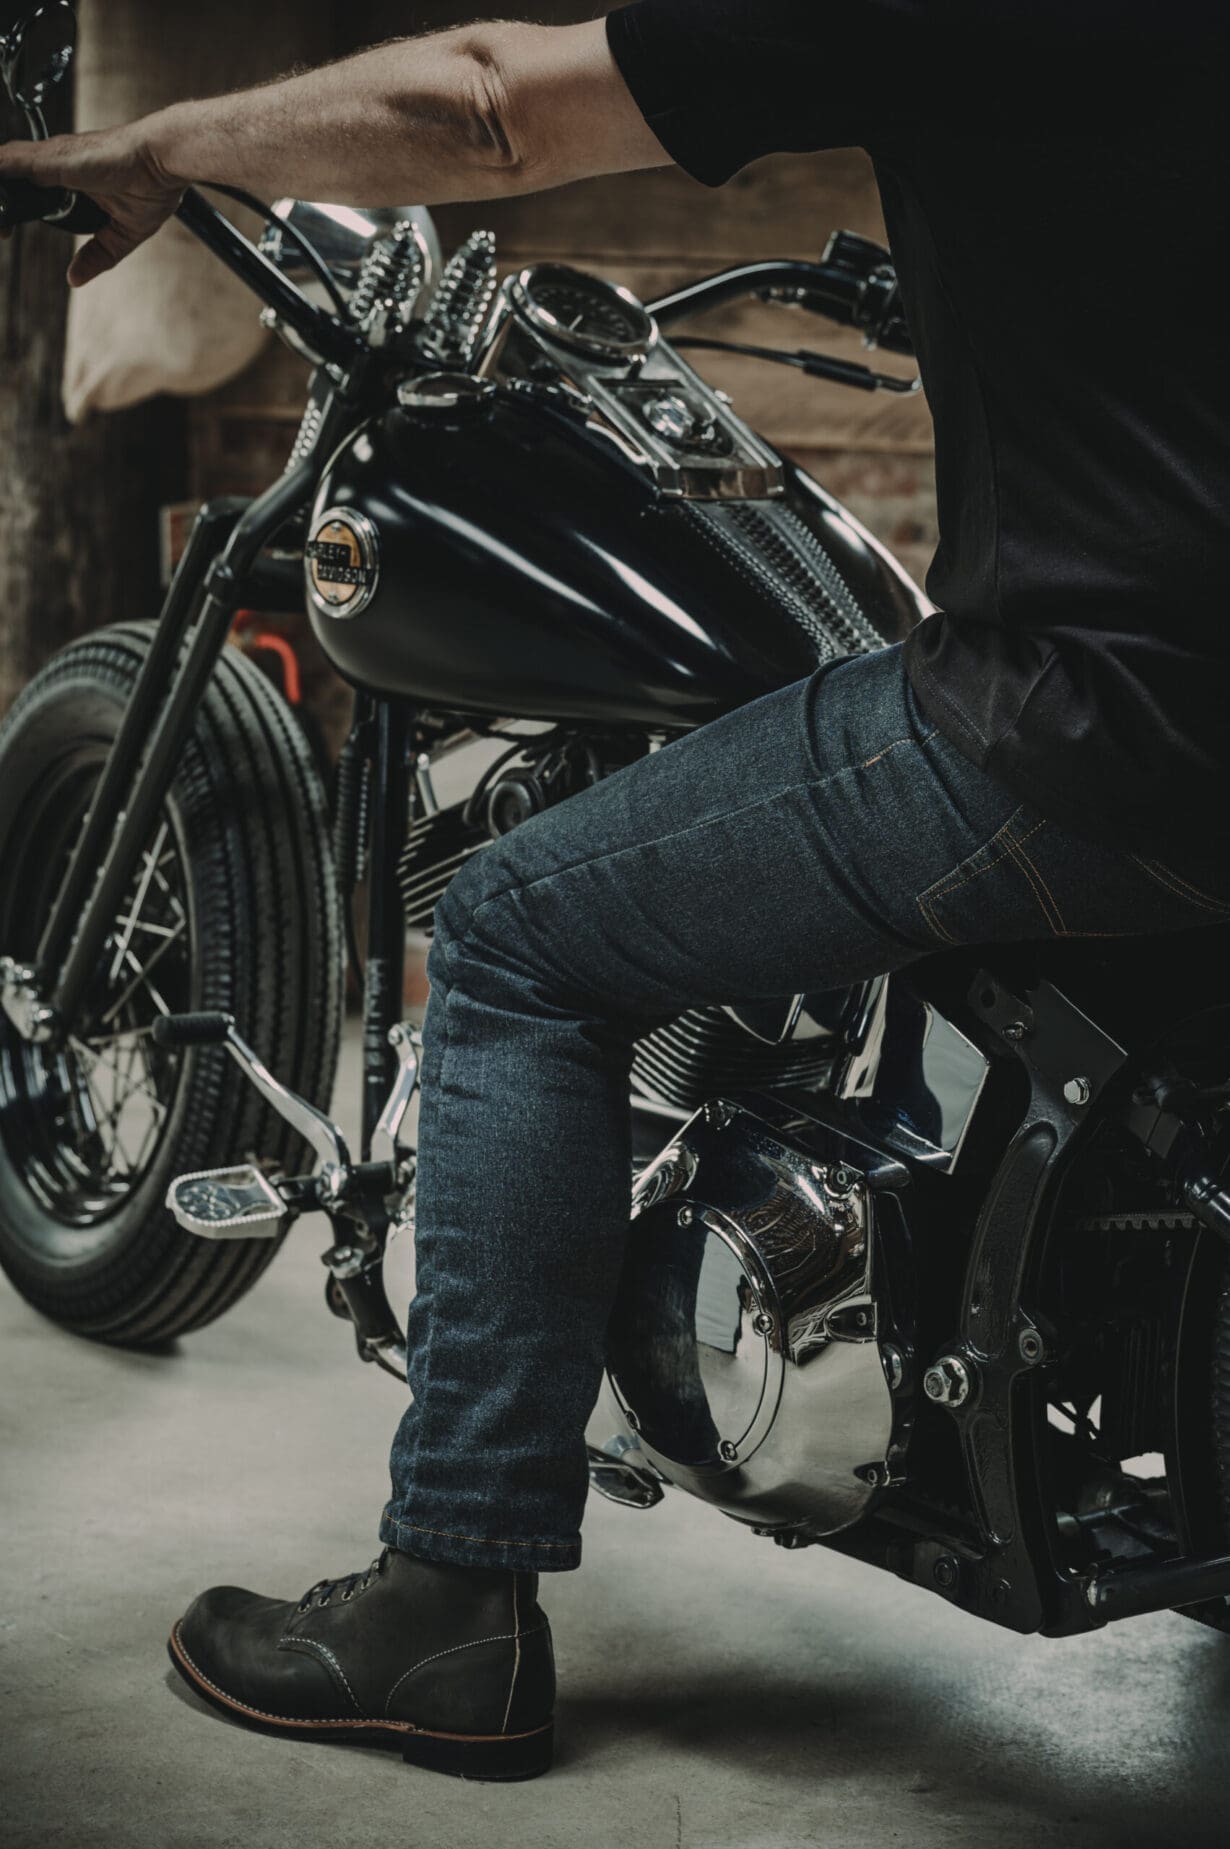 Roadskin Unveils Upgraded Paranoid Motorcycle Jeans